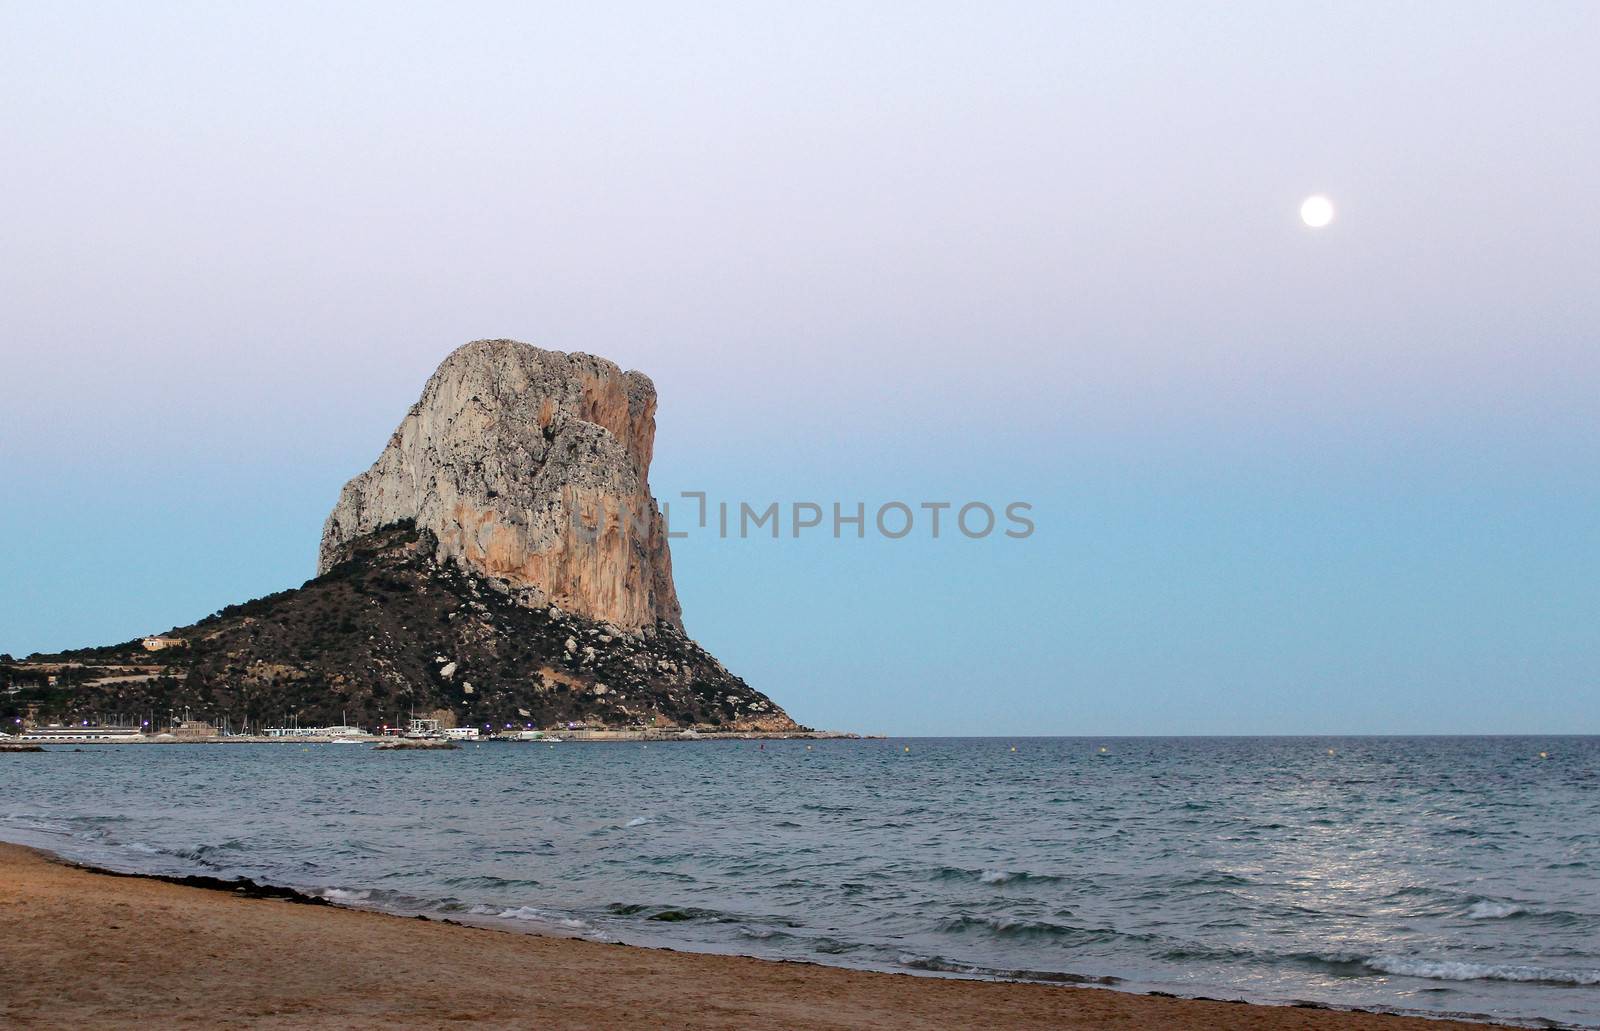 Panoramic view over Calp beach and famous Natural Park of Penon de Ifach (Spain).